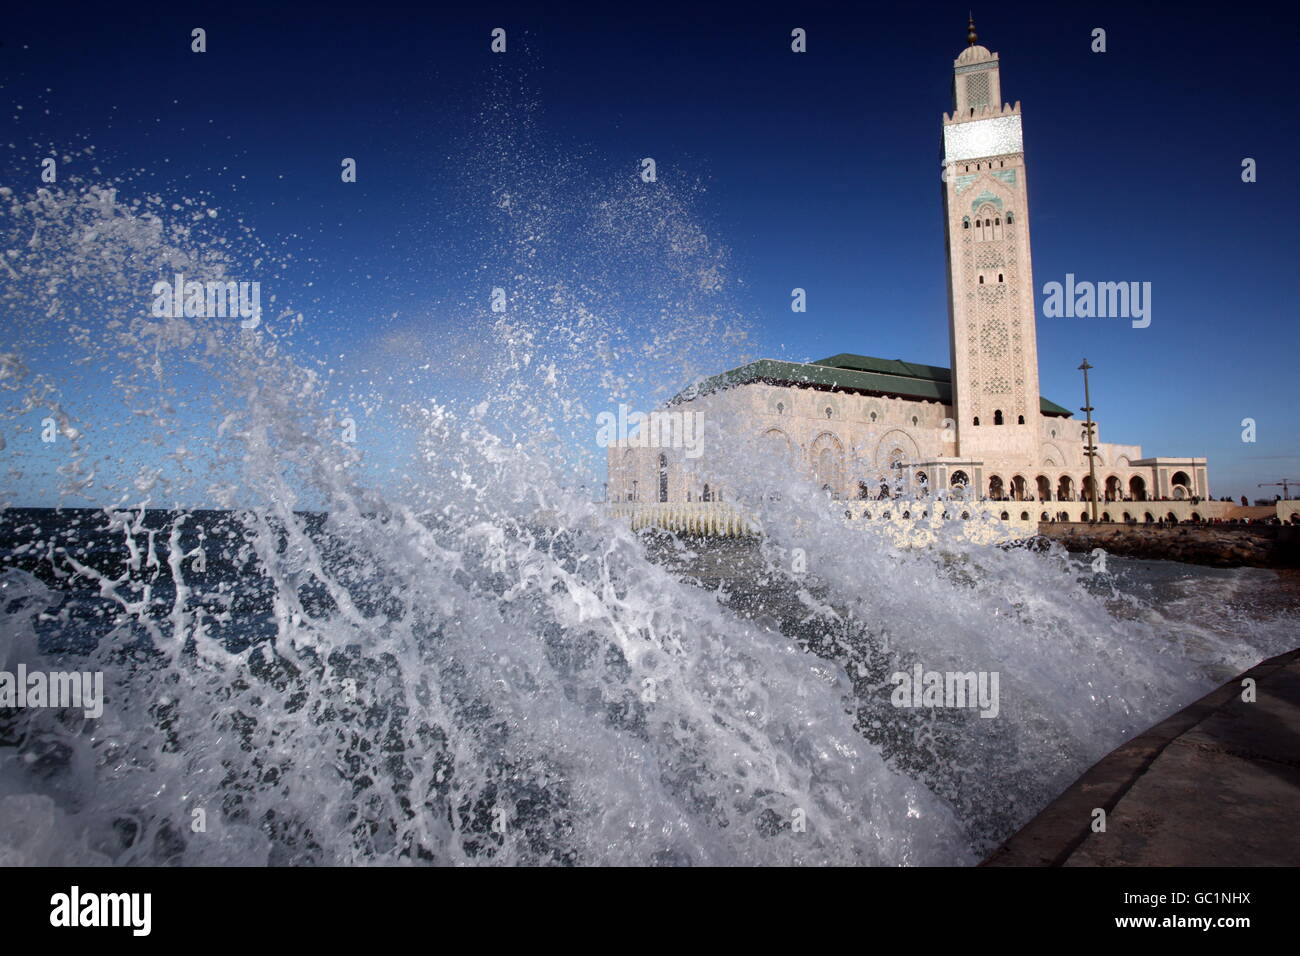 The Hassan 2 Mosque in the City of Casablanca in Morocco , North Africa. Stock Photo